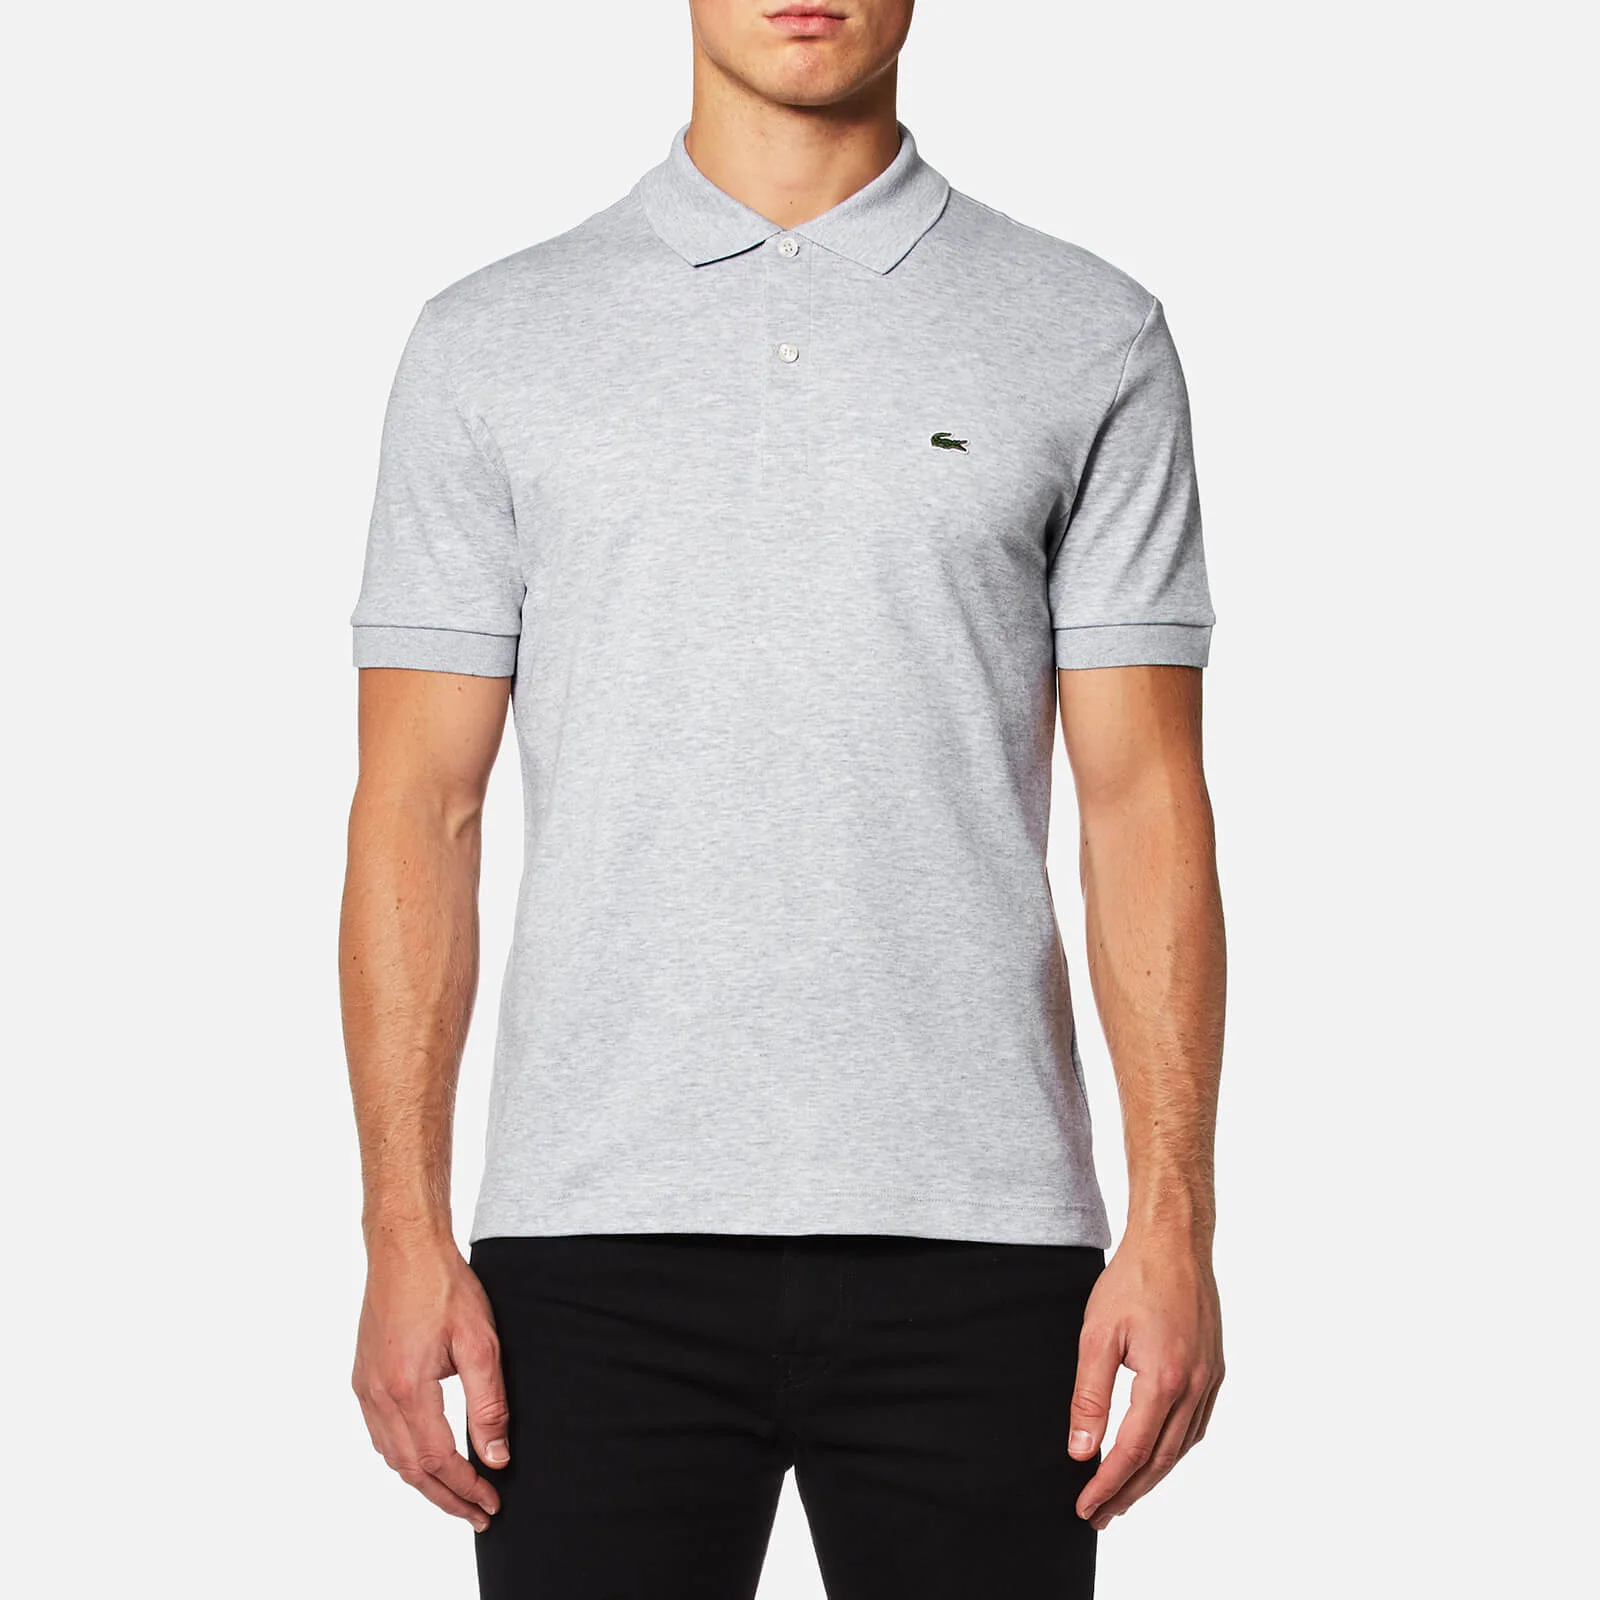 Lacoste Men's Polo Shirt - Silver Chine Image 1